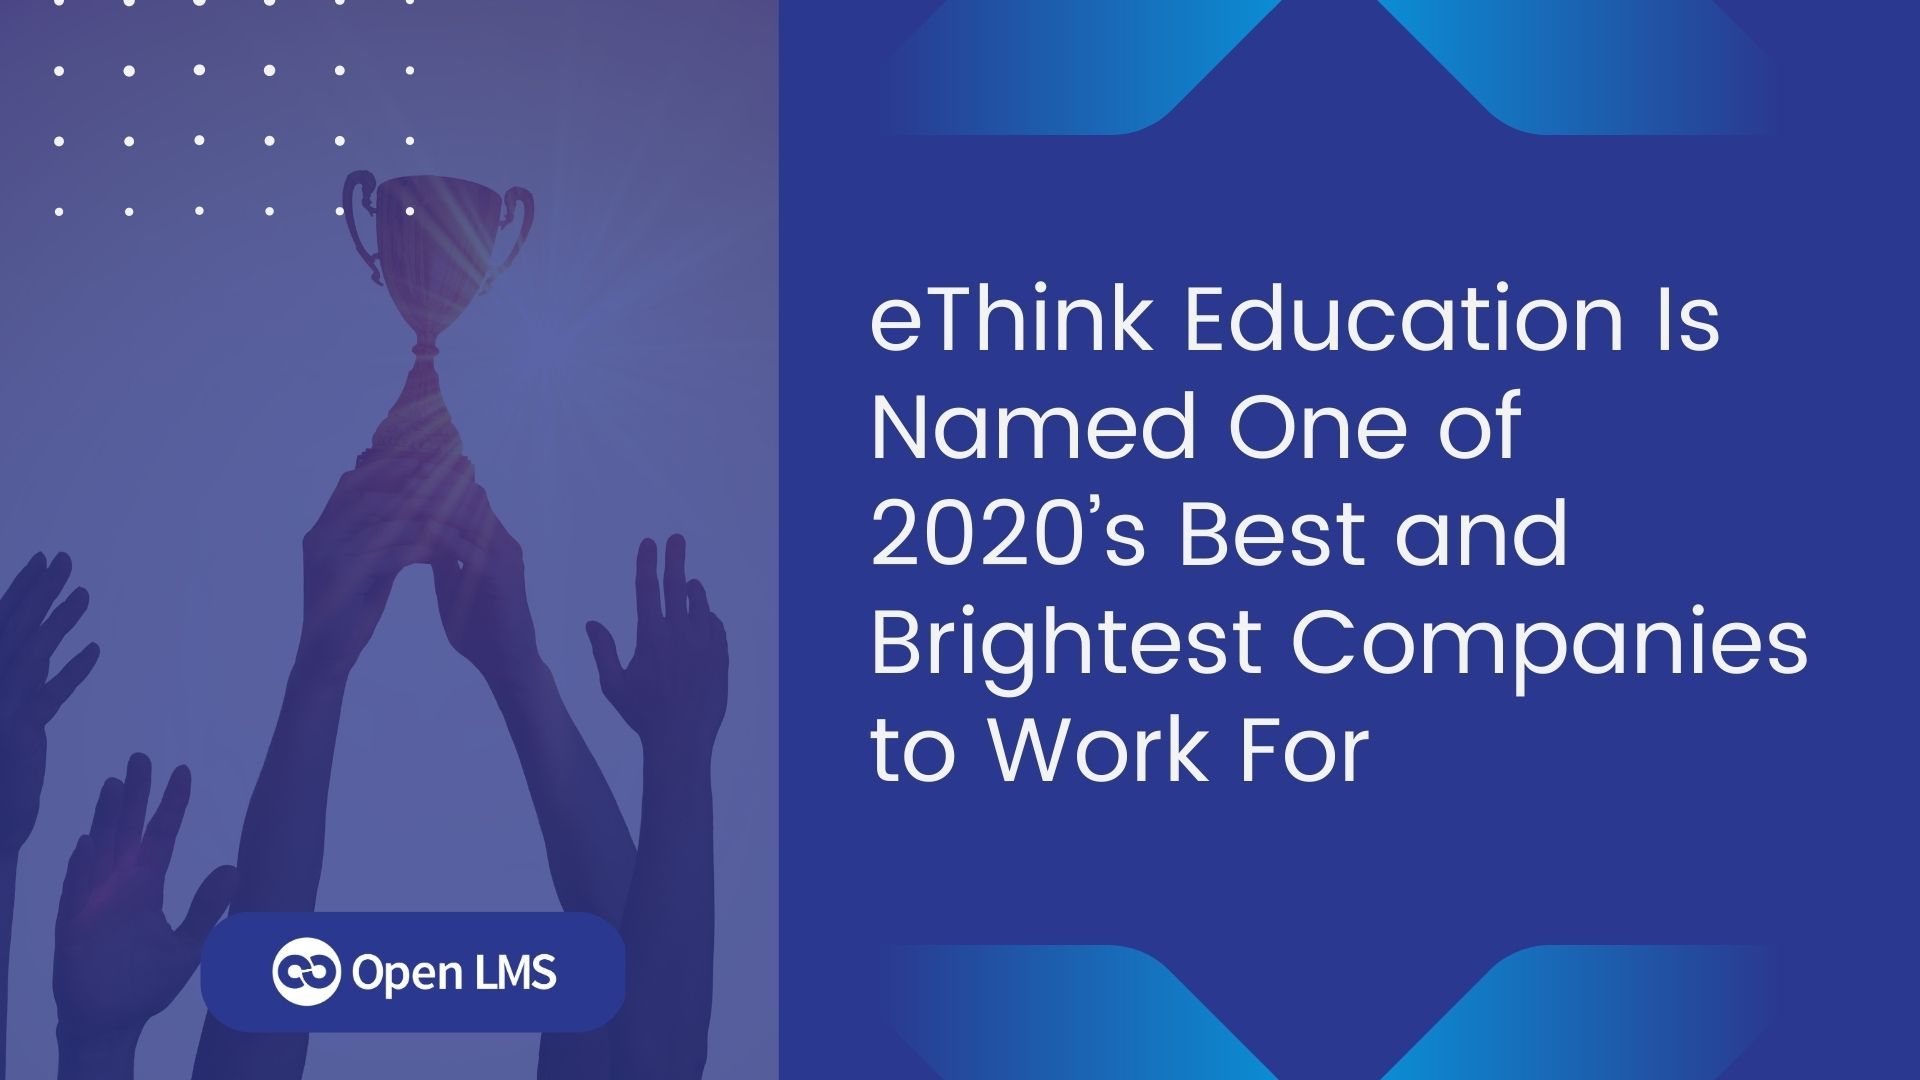 eThink Education Is Named One of 2020’s Best and Brightest Companies to Work For